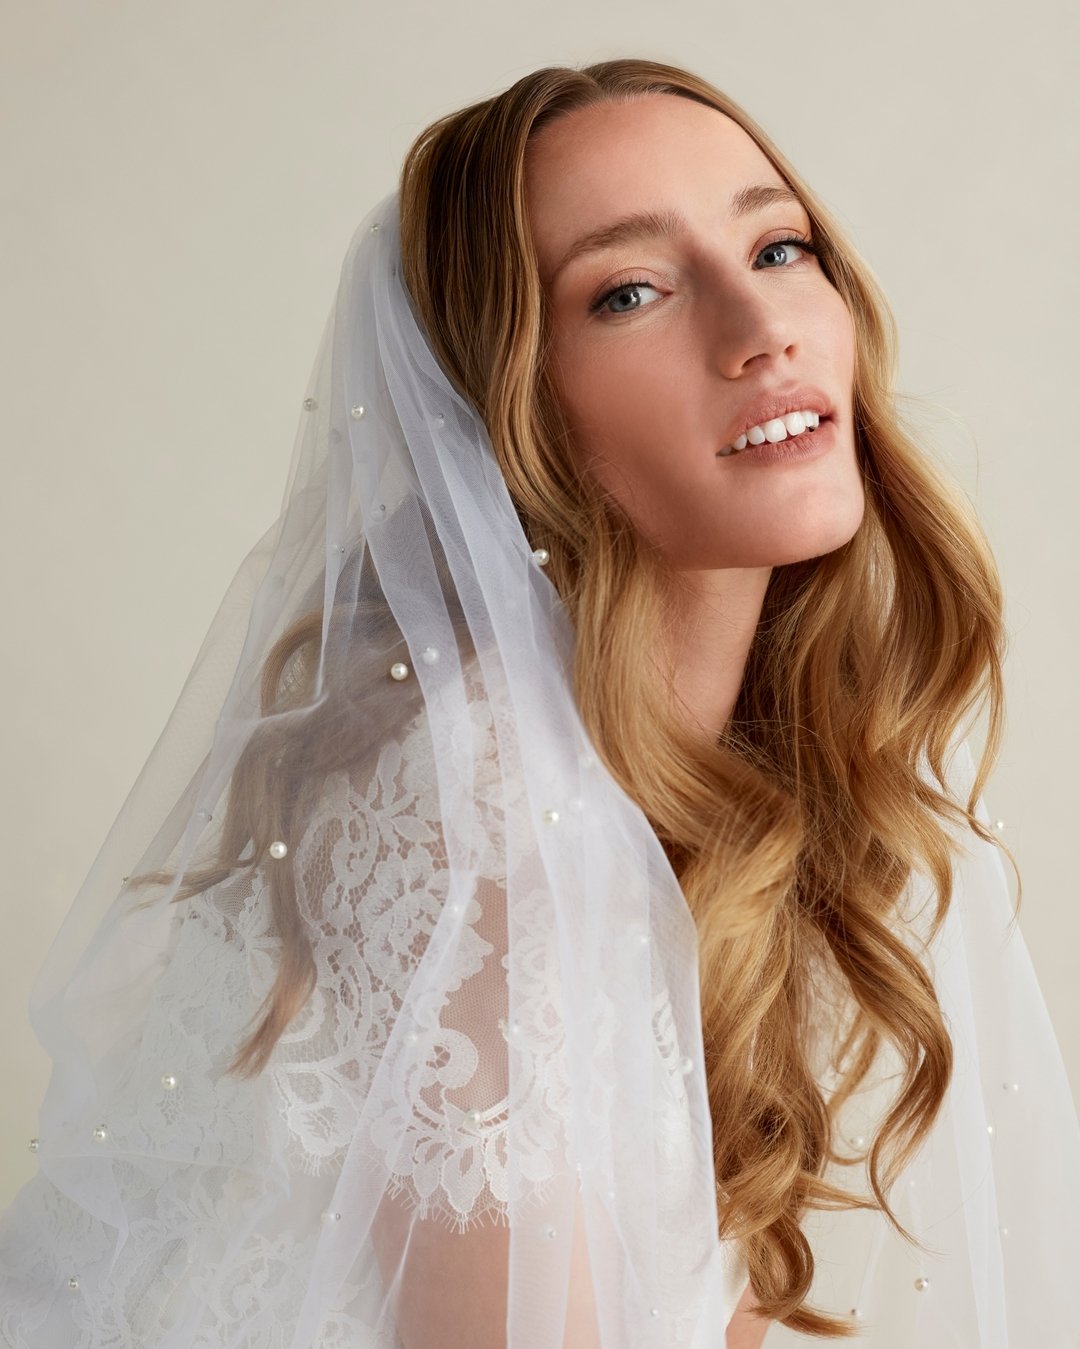 Why is a natural Makeup look perfect for your
Wedding day? Because it is authentic to you, It is customized to enhance your unique beauty. This is timeless, easy to wear and very fresh for photos all day long. If you are not a makeup wearer, that's o